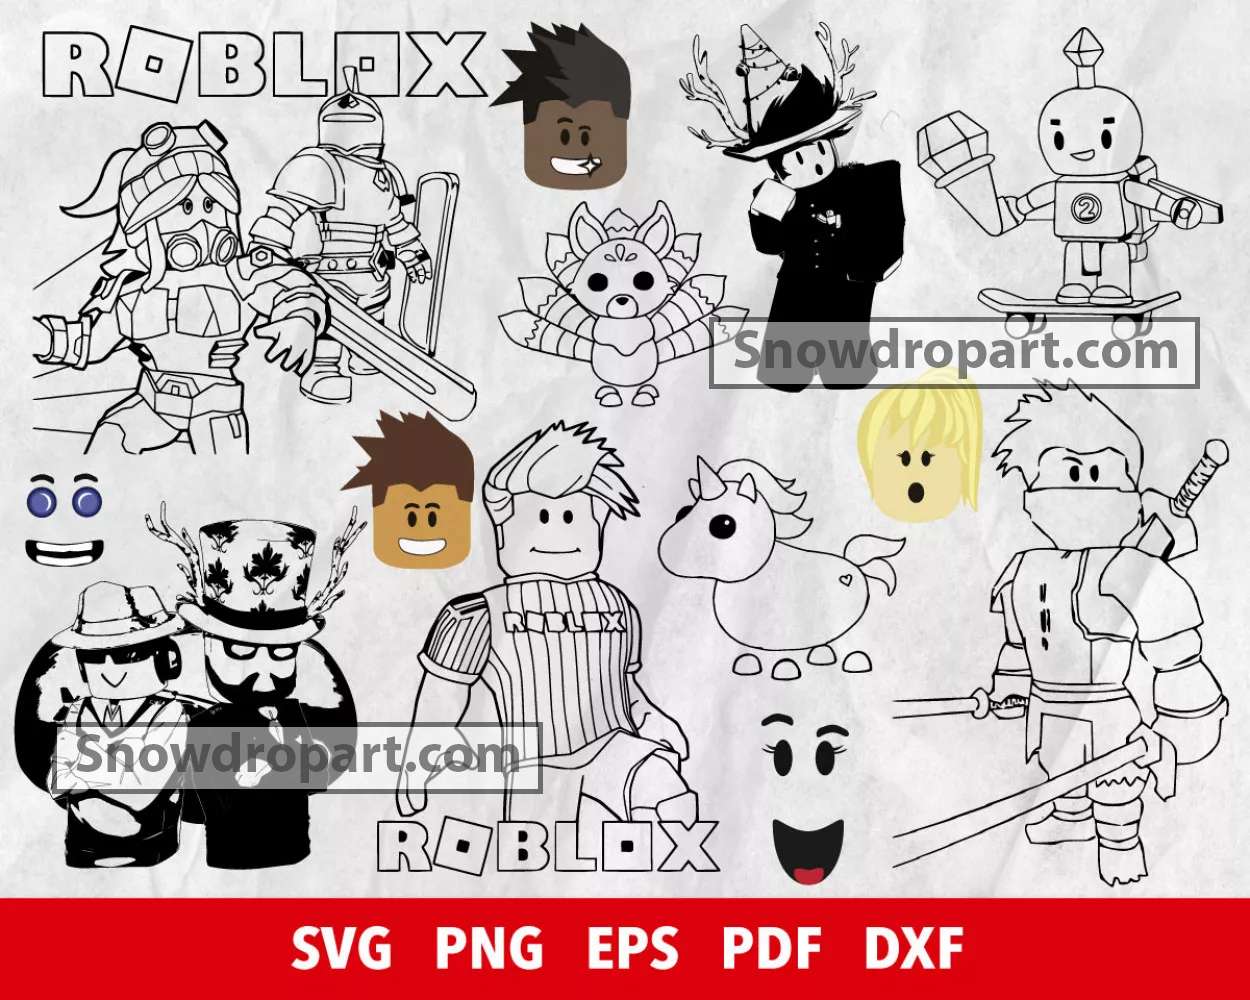 Doors Roblox characters artwork PNG digital download image, Doors Roblox  digital file for sublimation and crafts